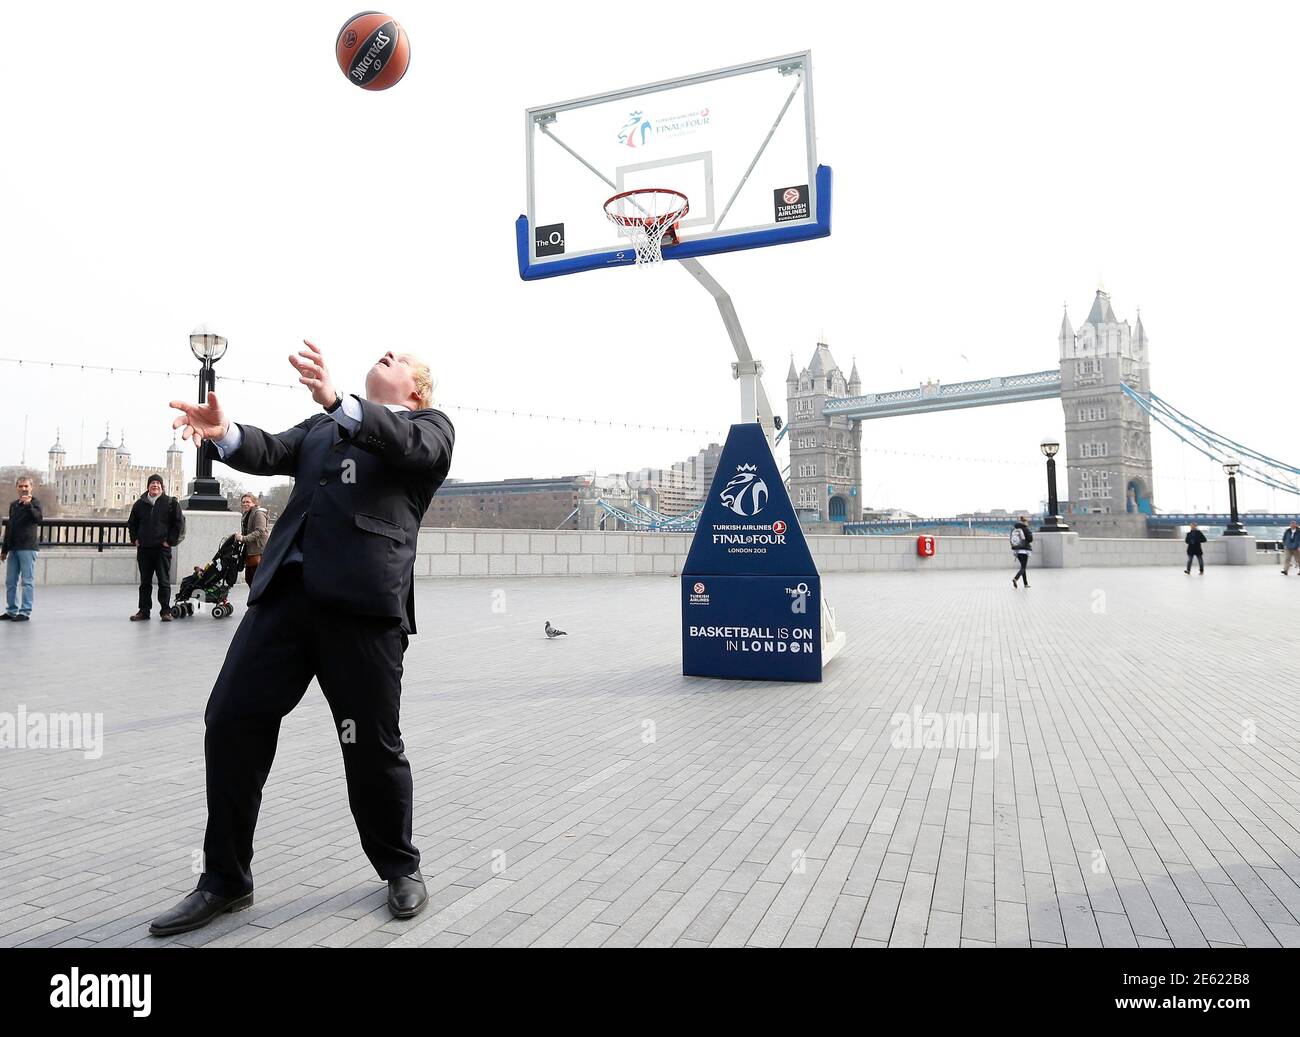 London Mayor Boris Johnson shoots and scores with his back to the basket in  London April 8, 2013. The Mayor was promoting the Euroleague Final Four  basketball series to be held at